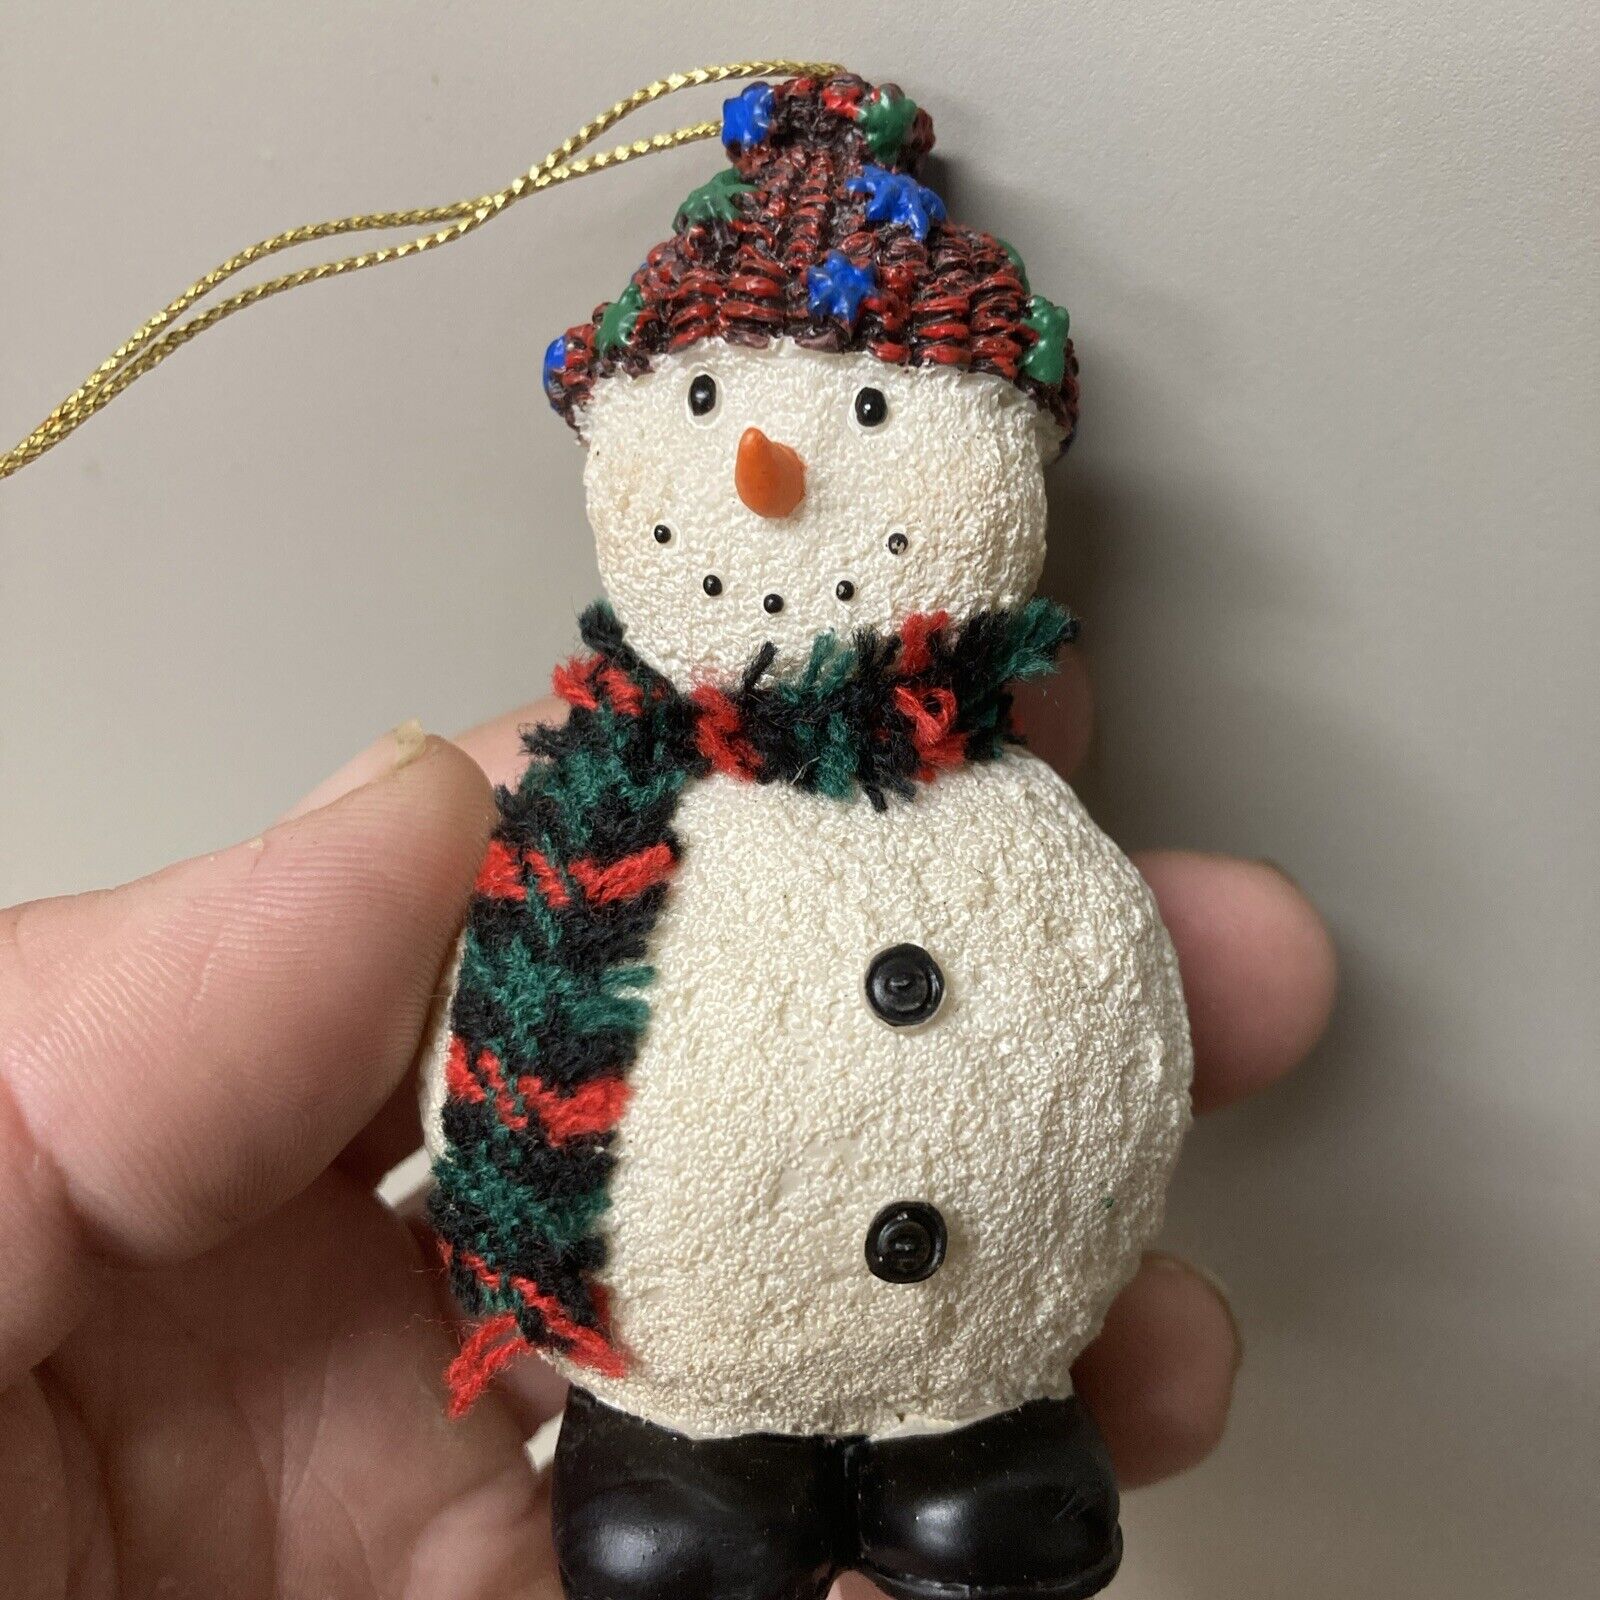 Coolest snowman, yet made out of clay, and very unique ornament. Beautiful